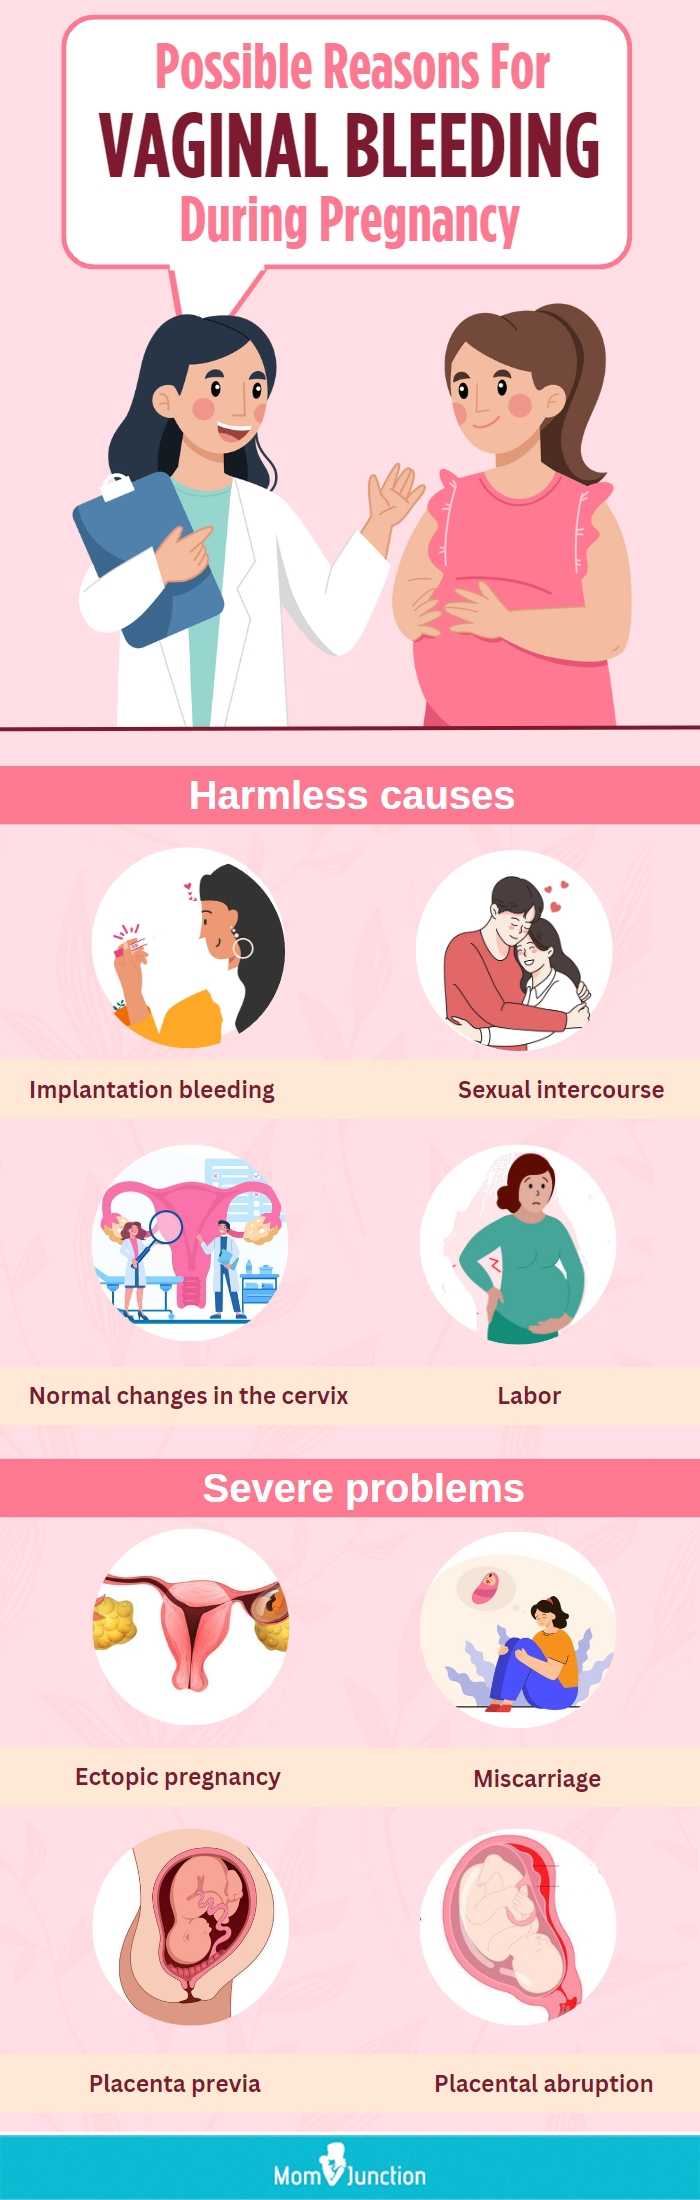 Causes of bleeding in the first trimester of pregnancy